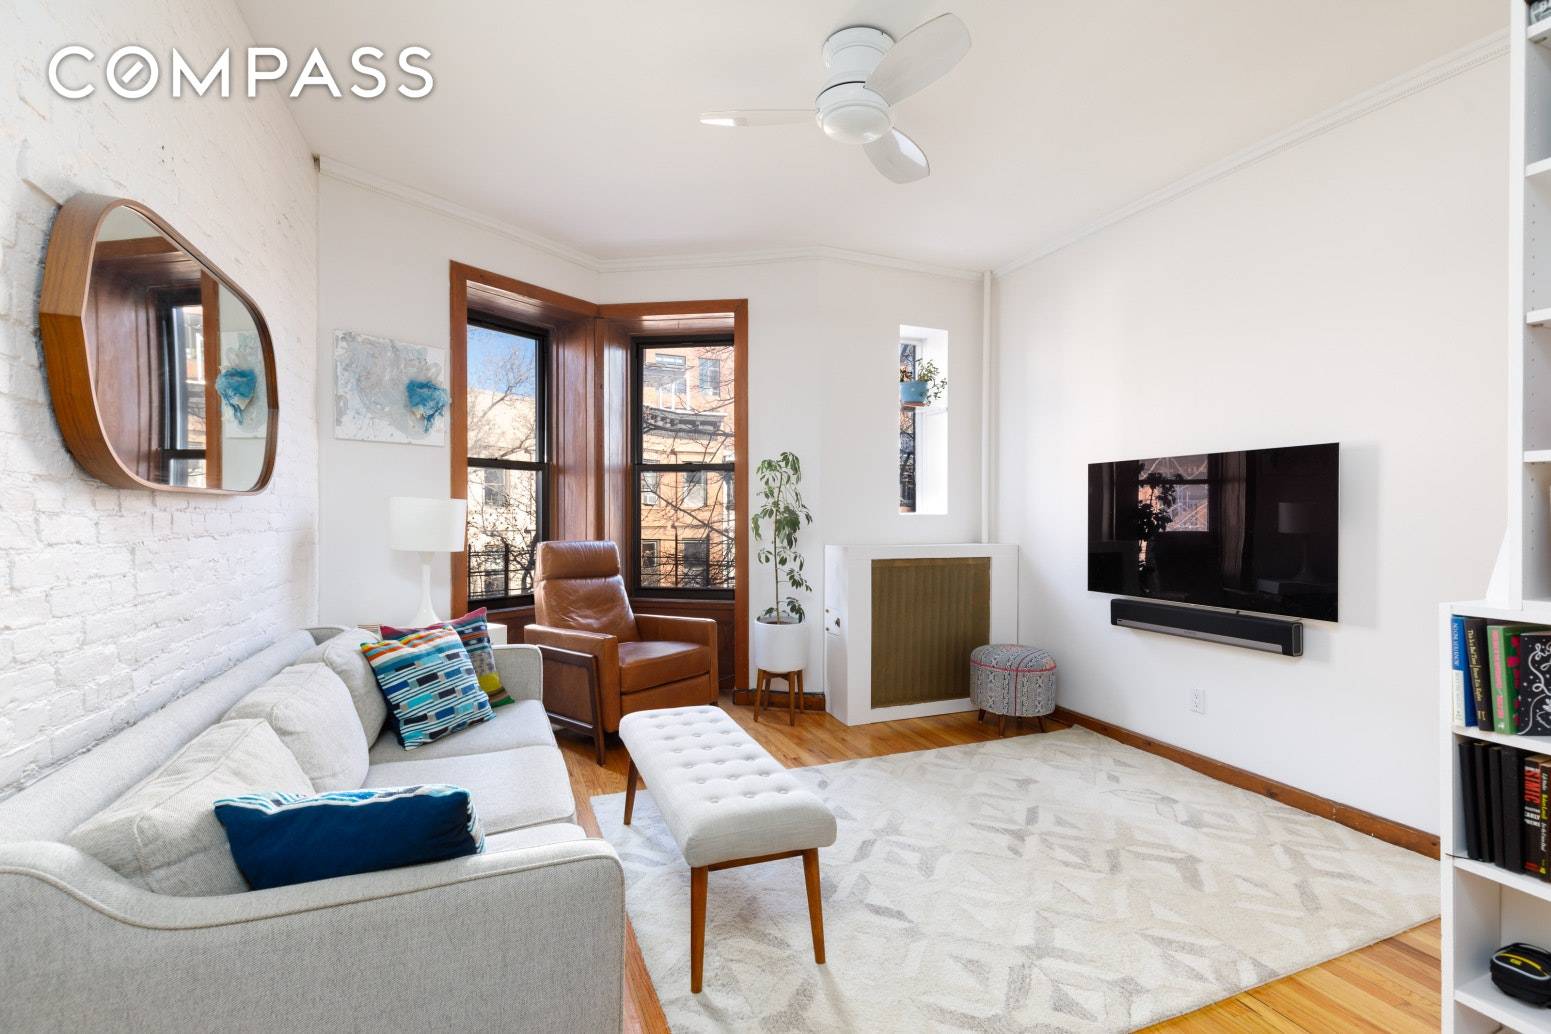 This lovely 2 1 2 bedroom home is nestled away on a tranquil tree lined block in the heart of Park Slope.